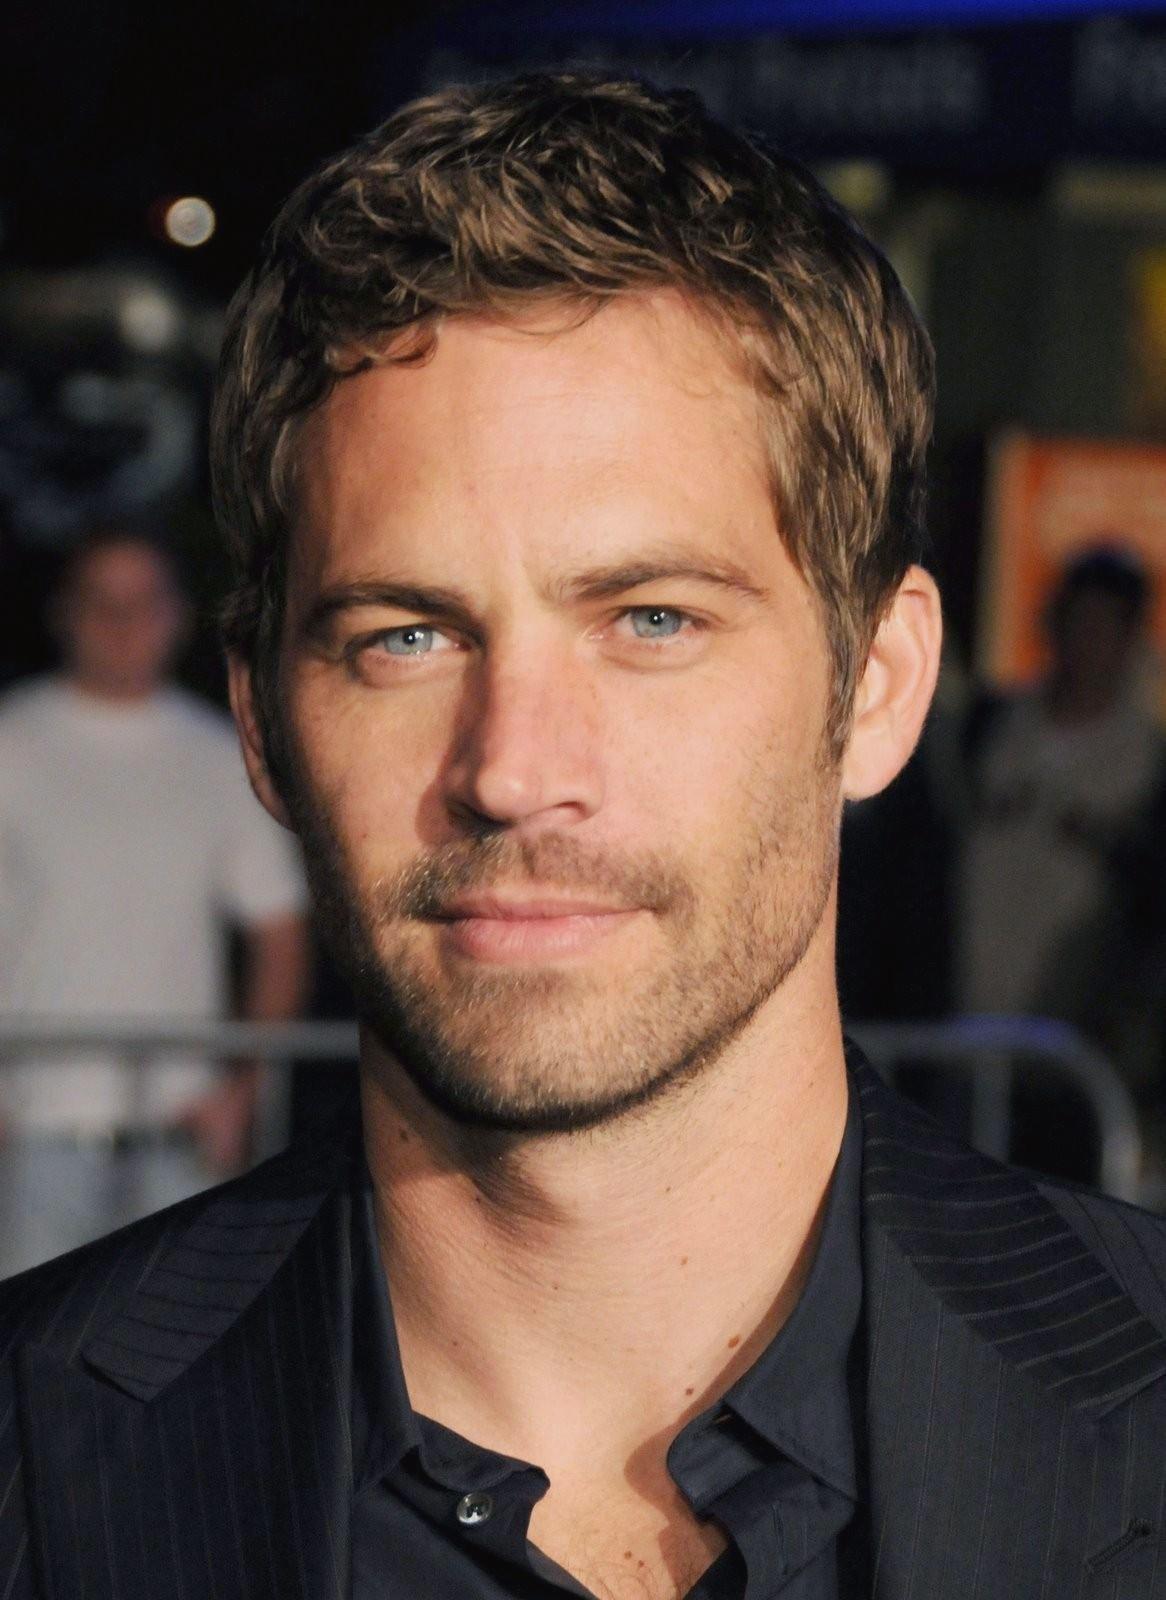 Paul Walkers Father Sues Porsche, Almost 2 Years After 